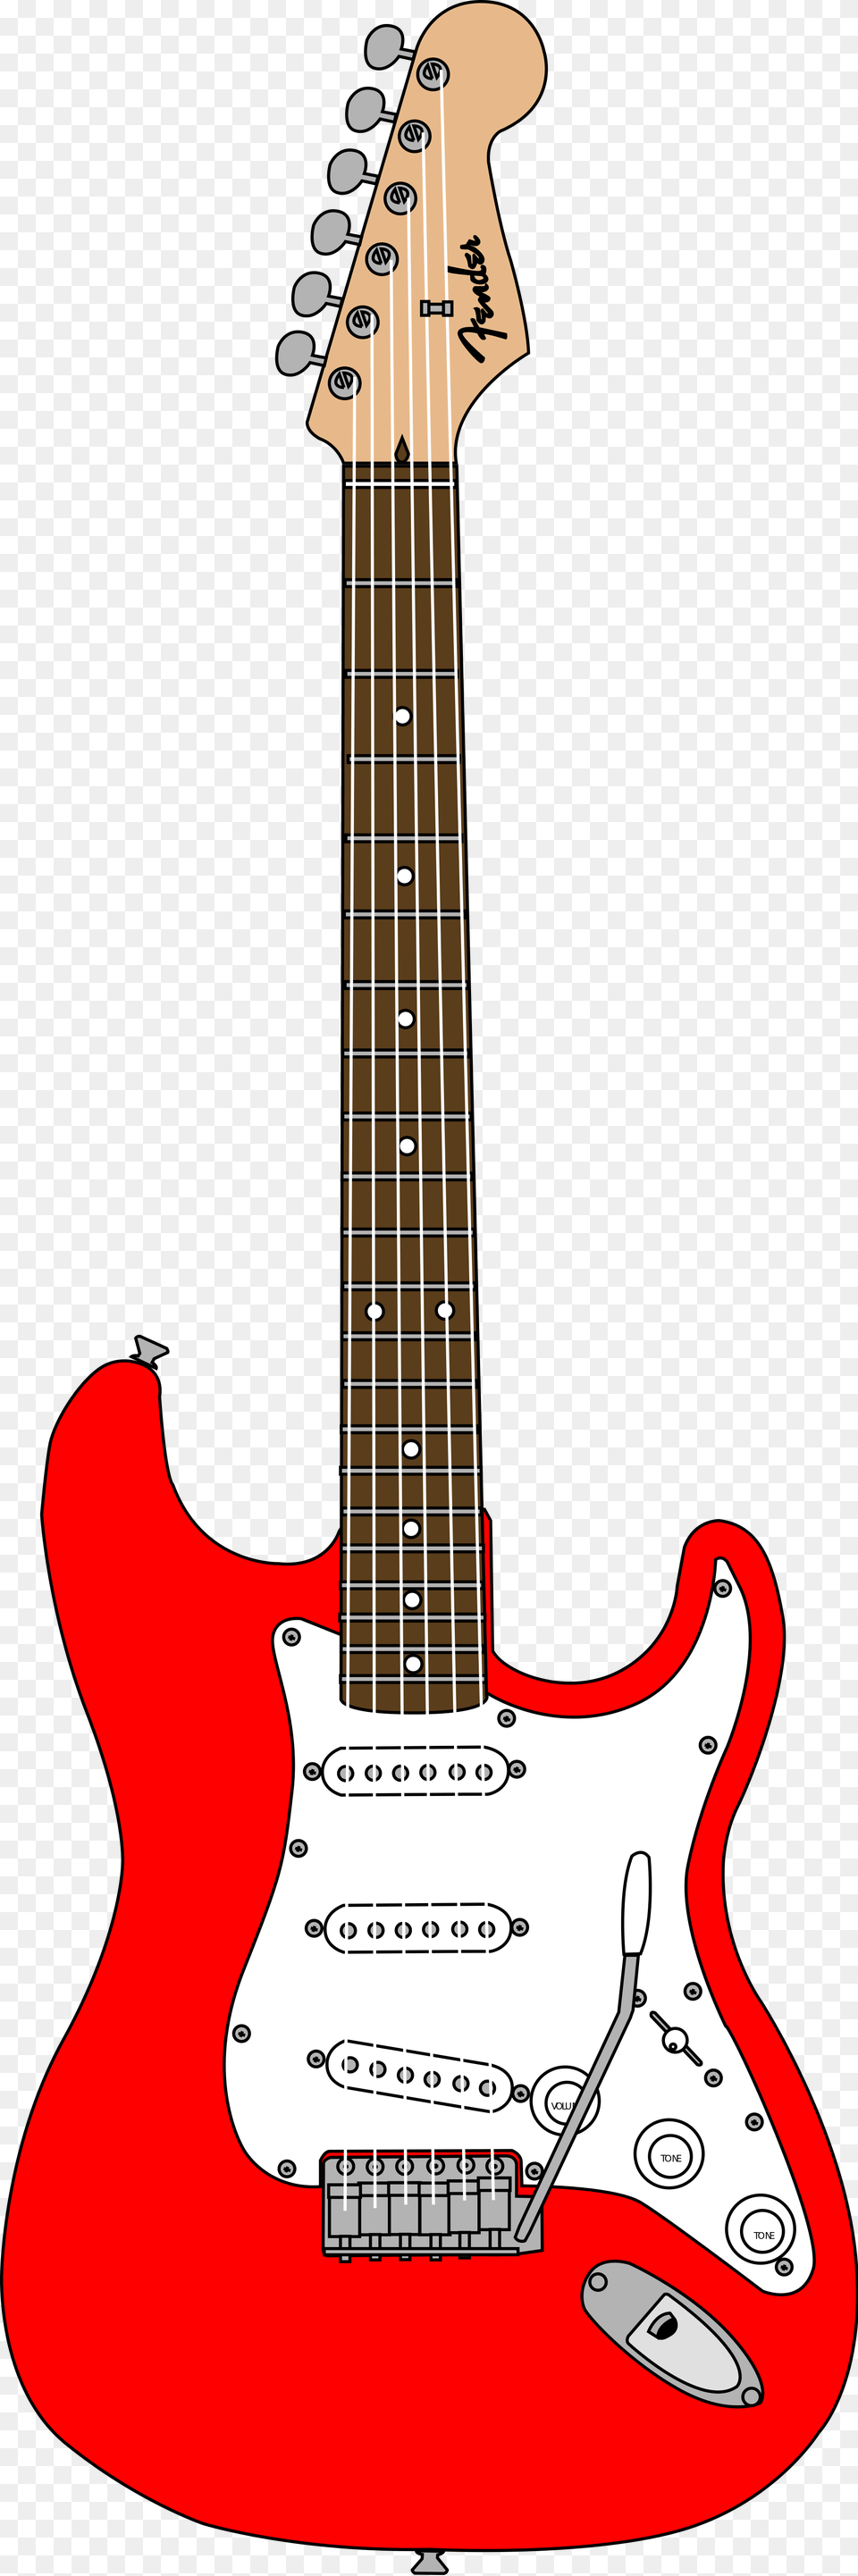 Drawing Guitar Red Red Fender Stratocaster, Bass Guitar, Musical Instrument Png Image